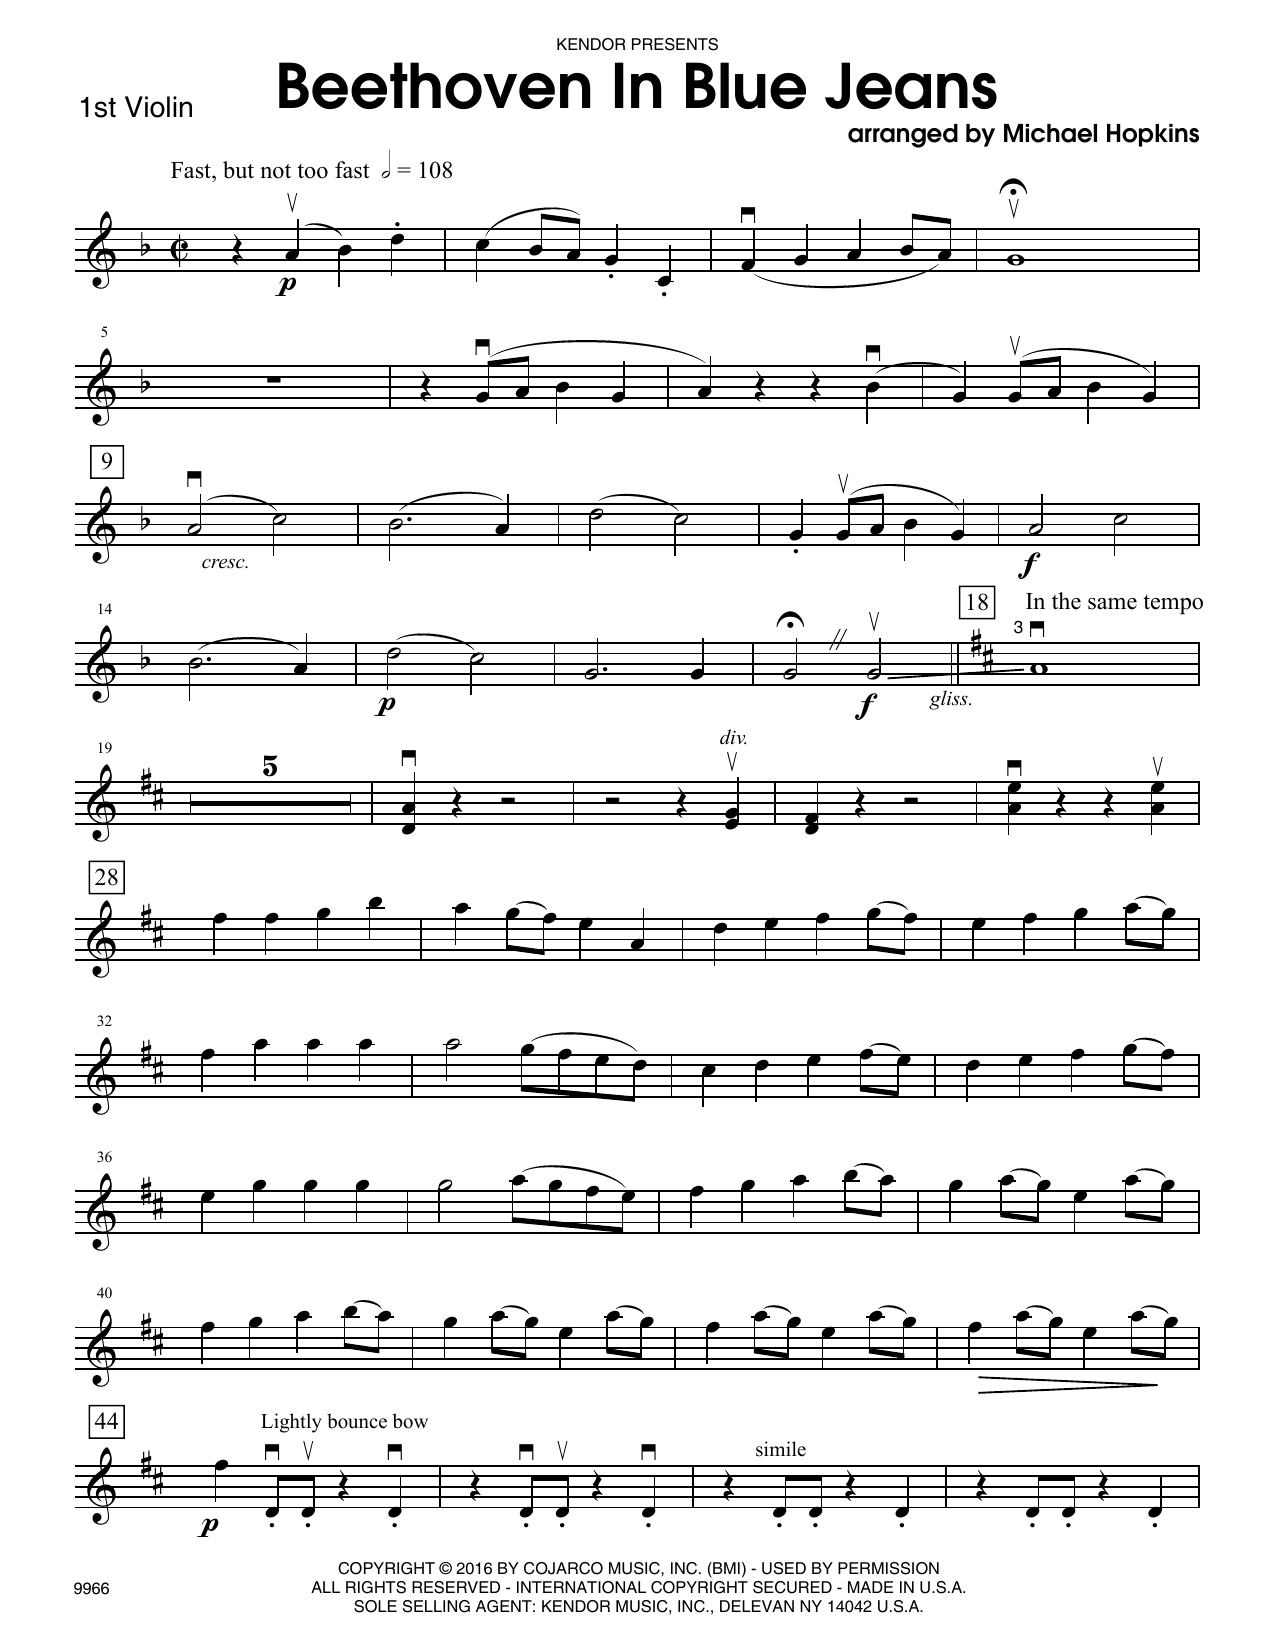 Download Michael Hopkins Beethoven In Blue Jeans - 1st Violin Sheet Music